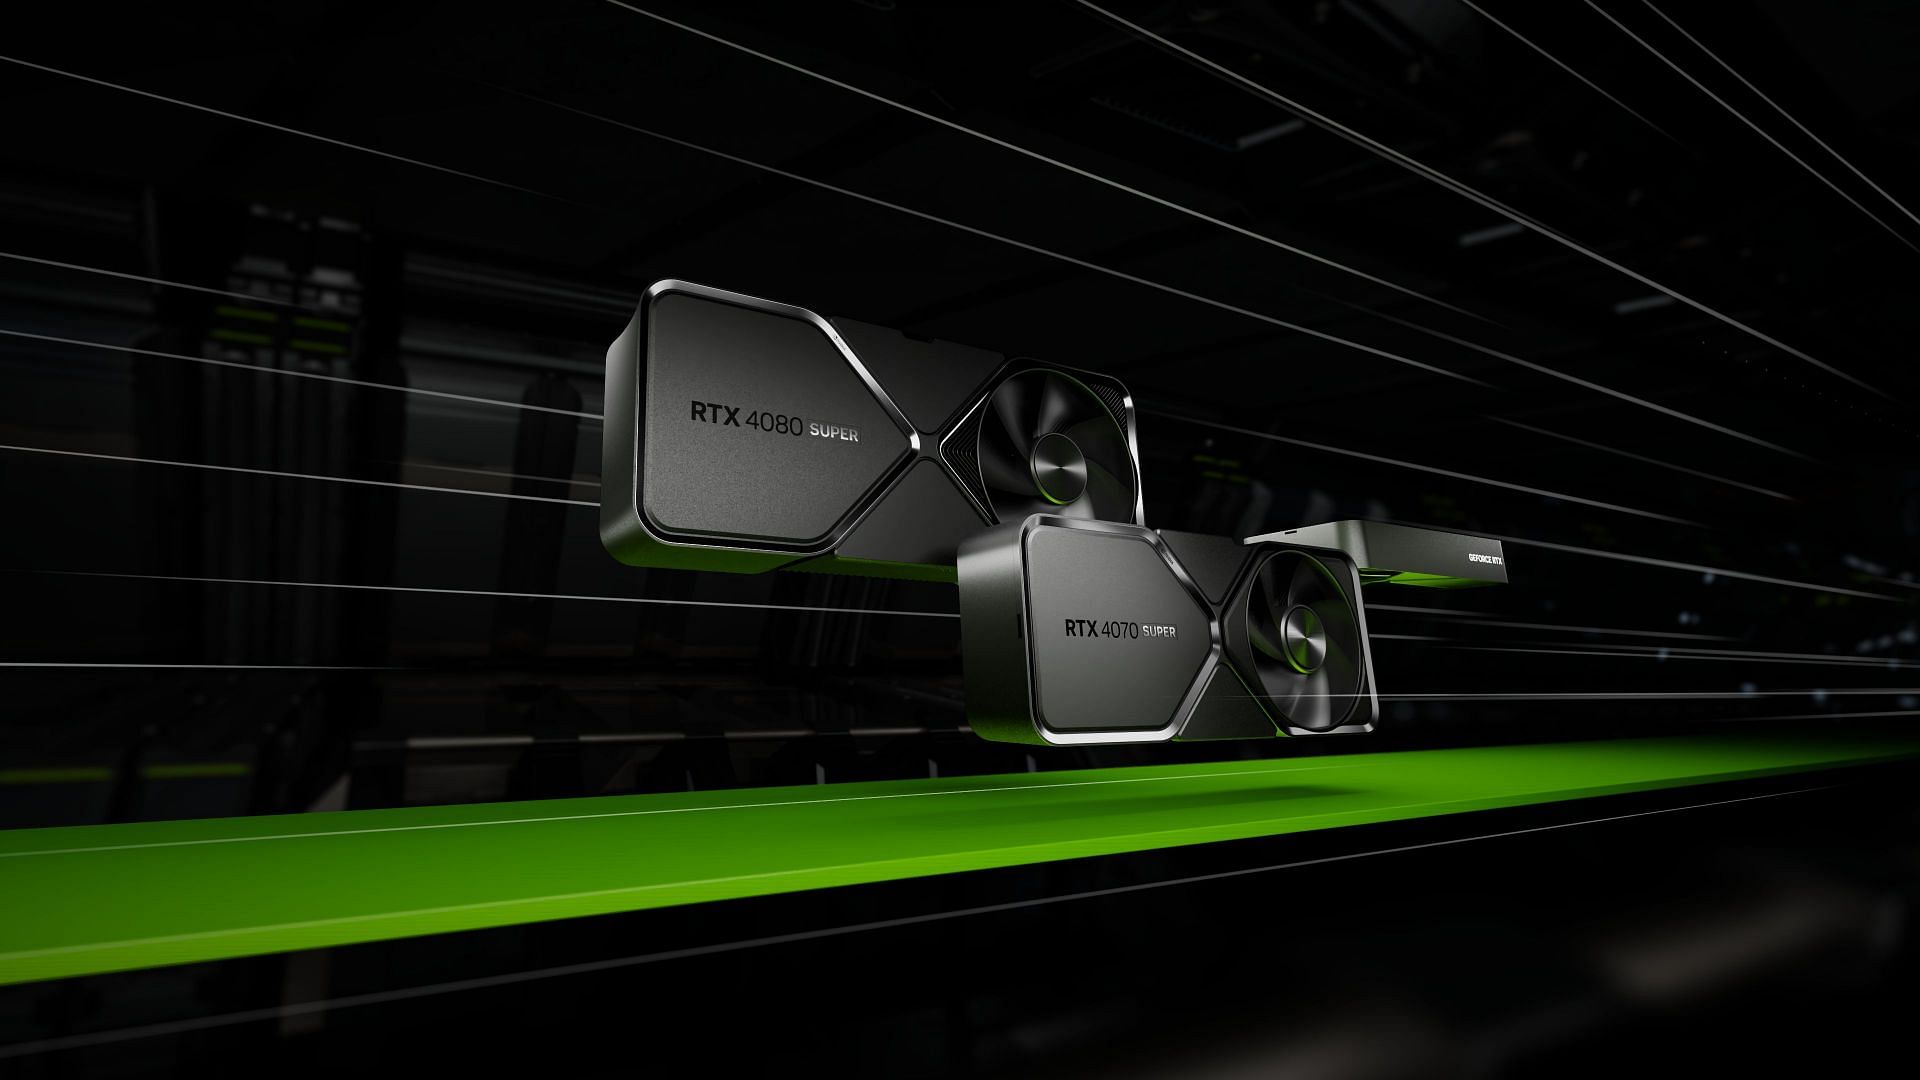 Multiple Nvidia RTX graphics cards are now available in the market (Image via Nvidia)